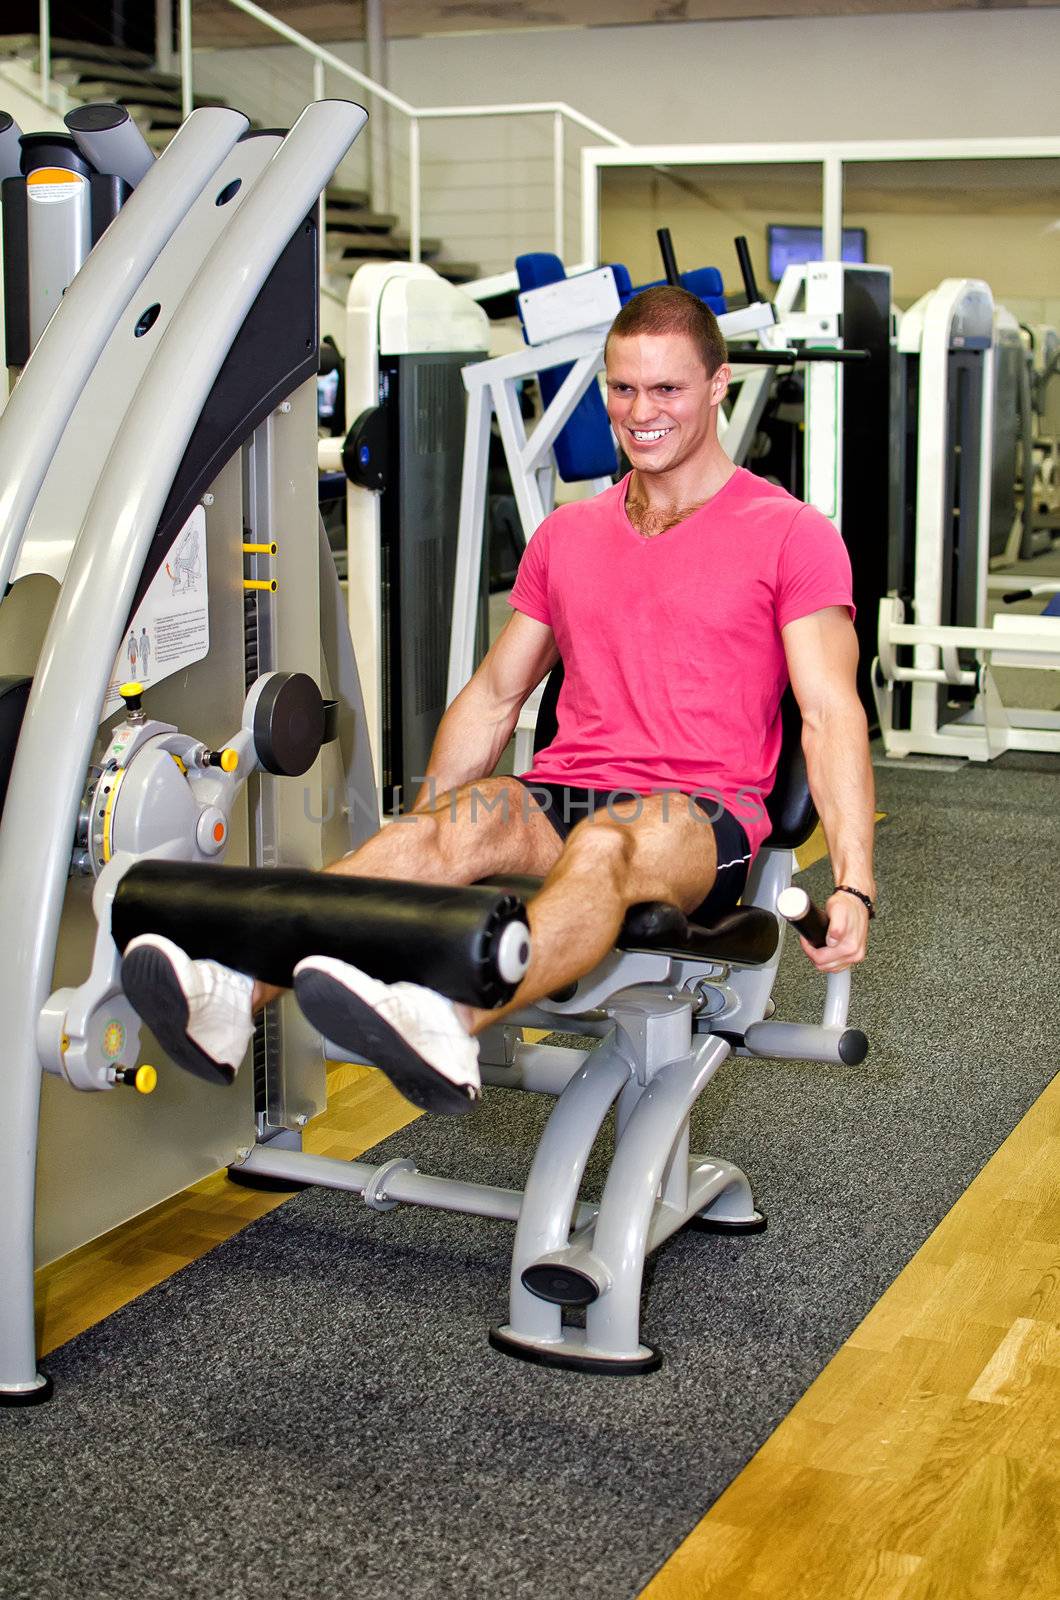 Man doing athlete exercise in fitness club